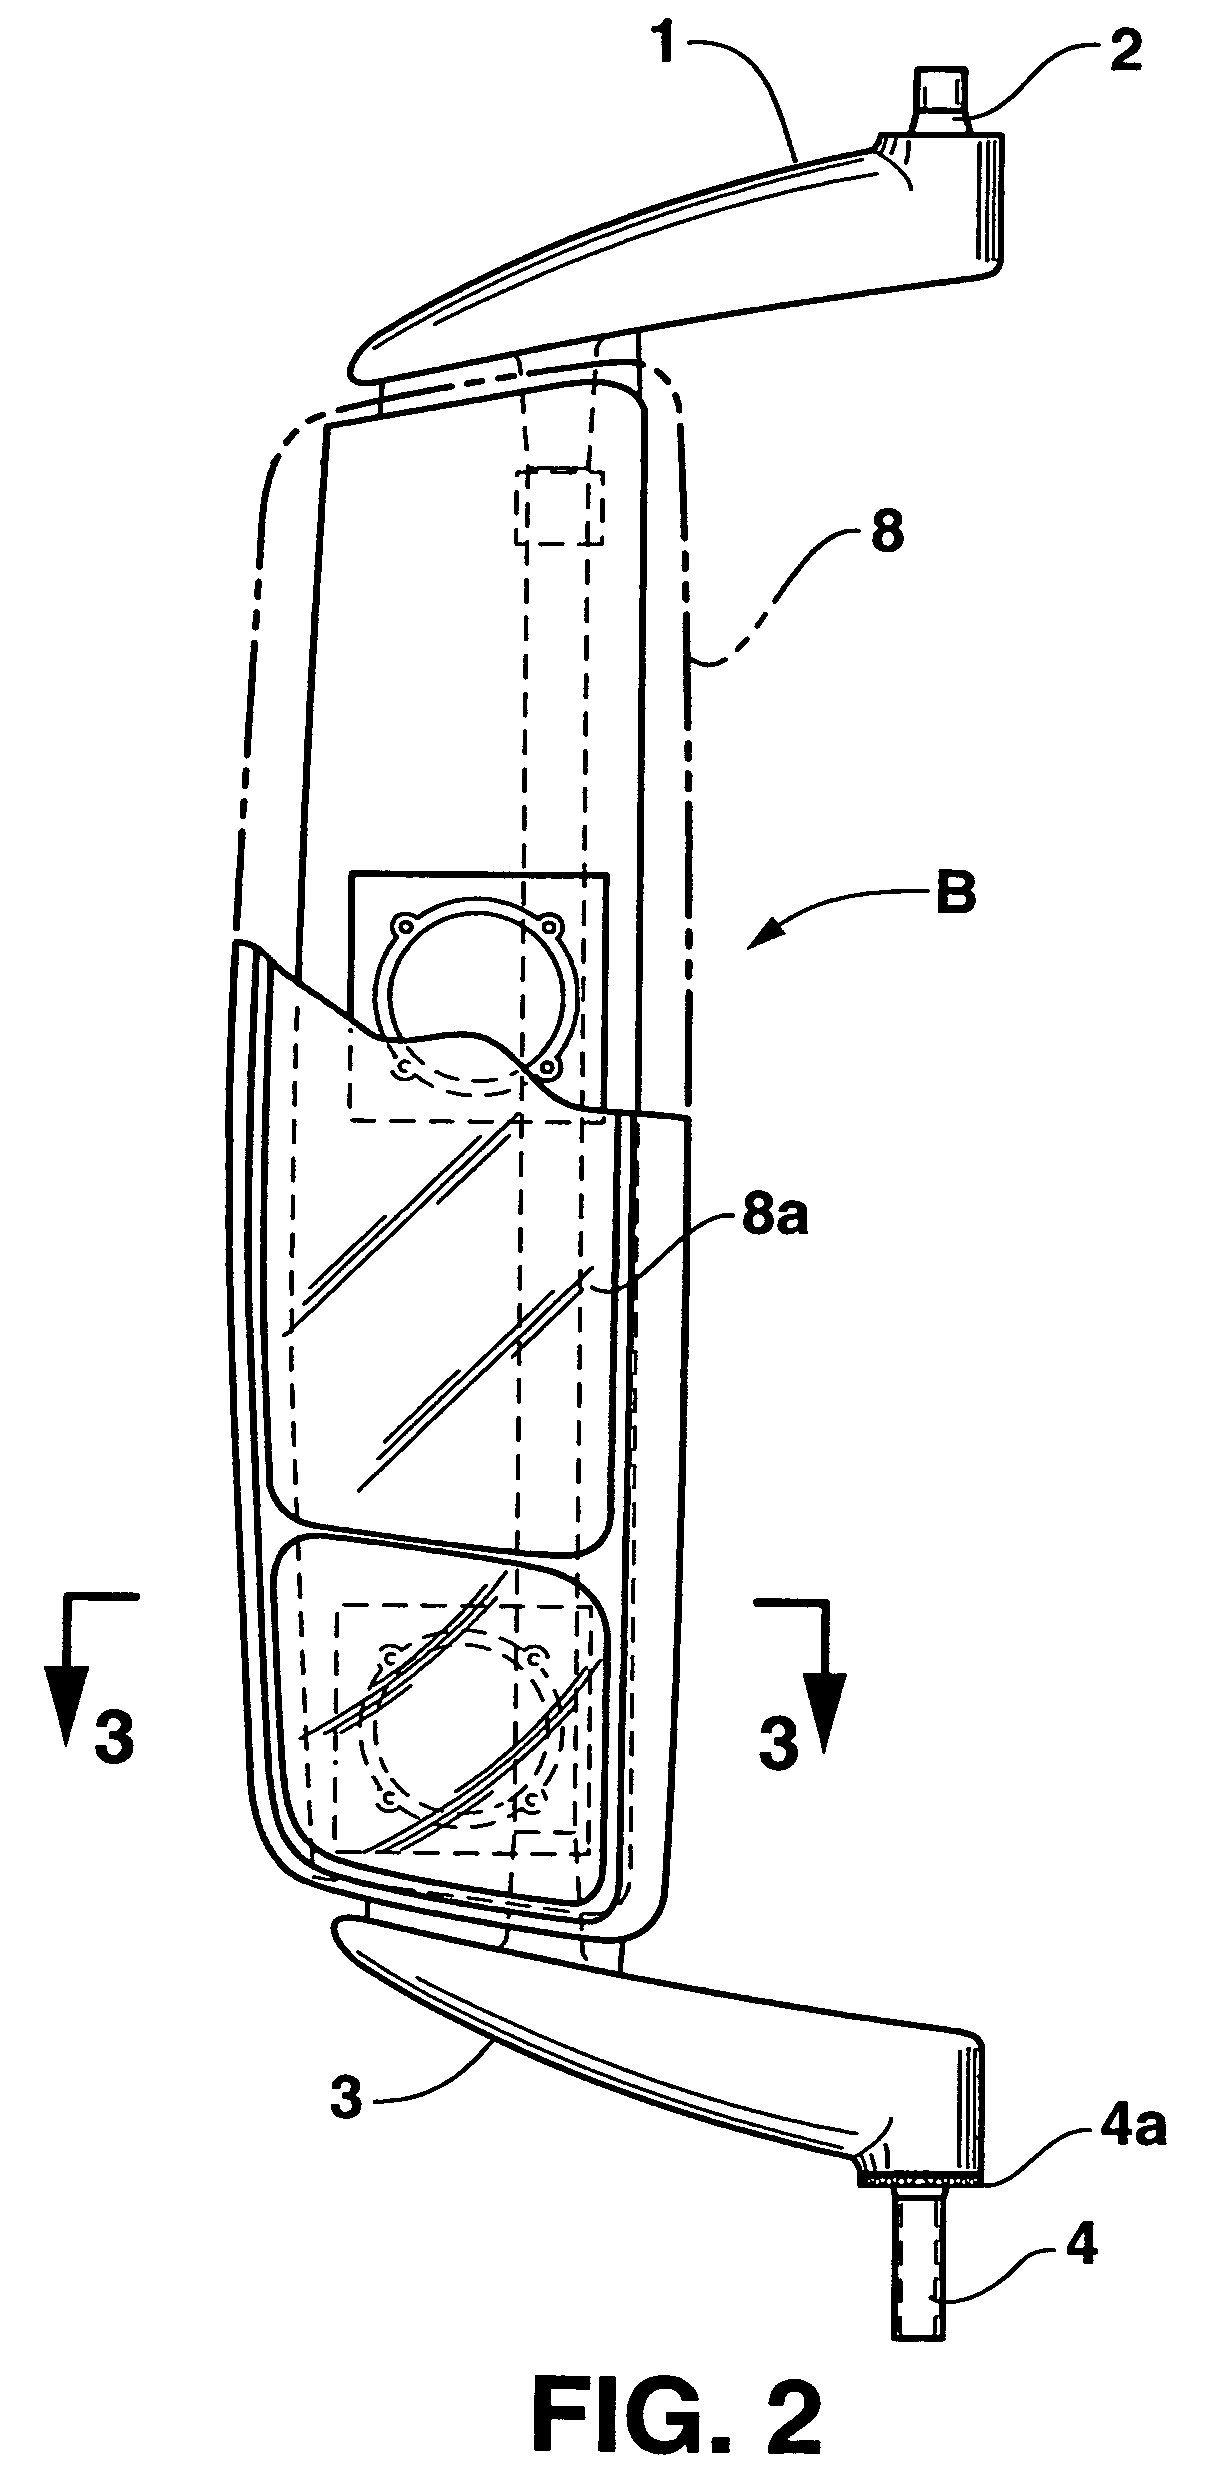 Support arm for vehicle mirror